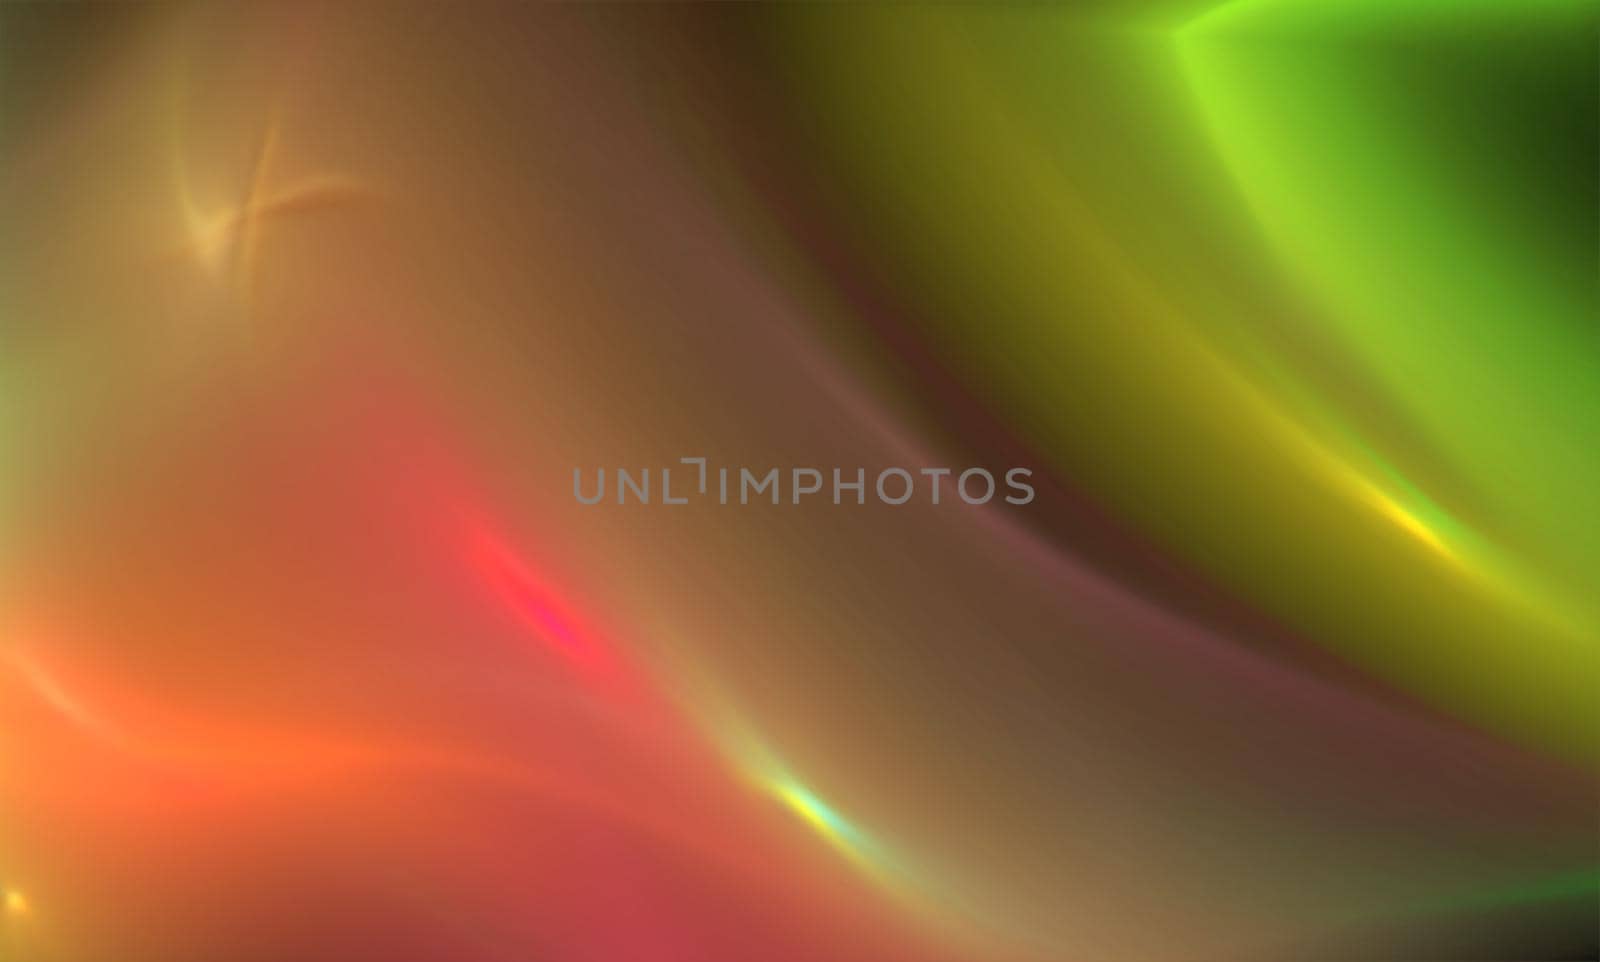 Abstract blurred background in bright colors of the rainbow. Colorful sleek banner template by bormash